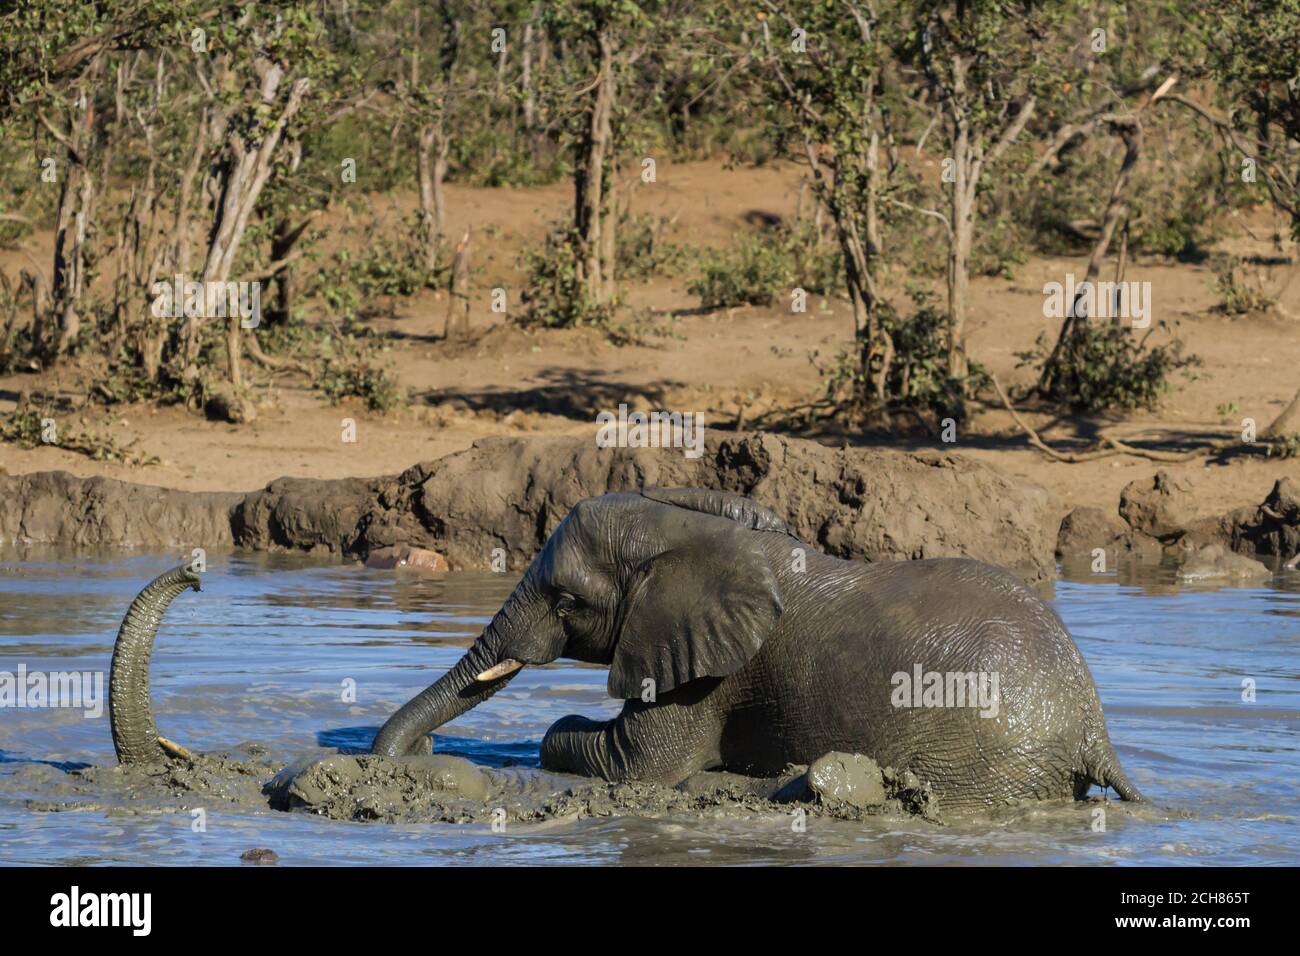 Closeup of elephants (Loxodanta africana) playing and enjoying a mud bath in a waterhole in Kruger National Park, South Africa Stock Photo